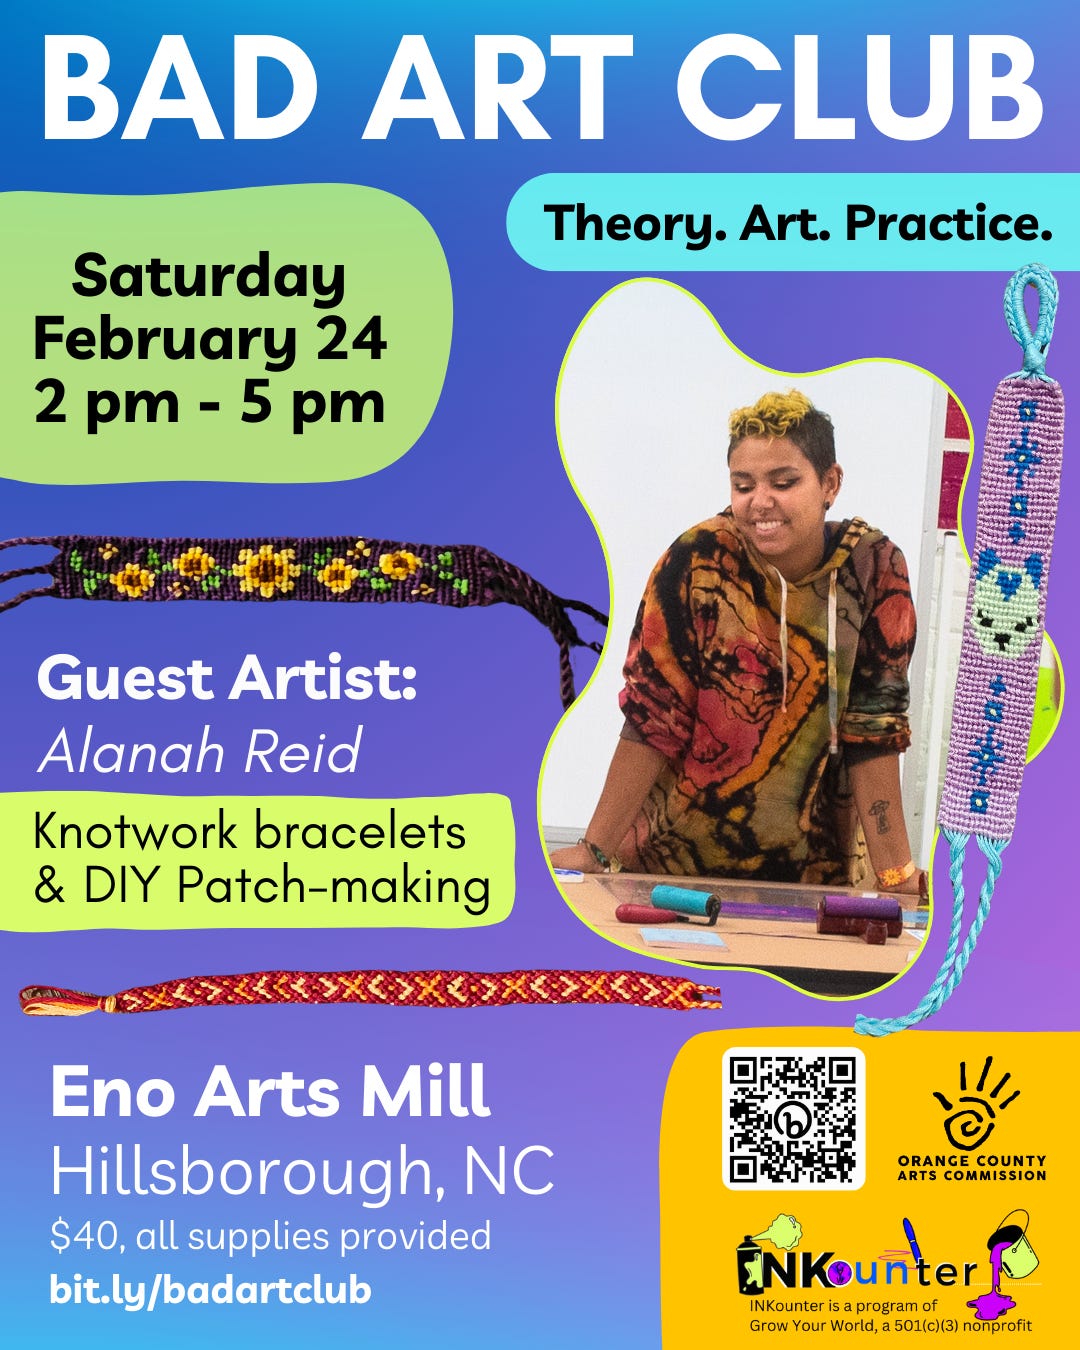 Promo poster for February Bad Art Club featuring a photo of Alanah Reid standing at a table smiling and several of their friendship-bracelets.